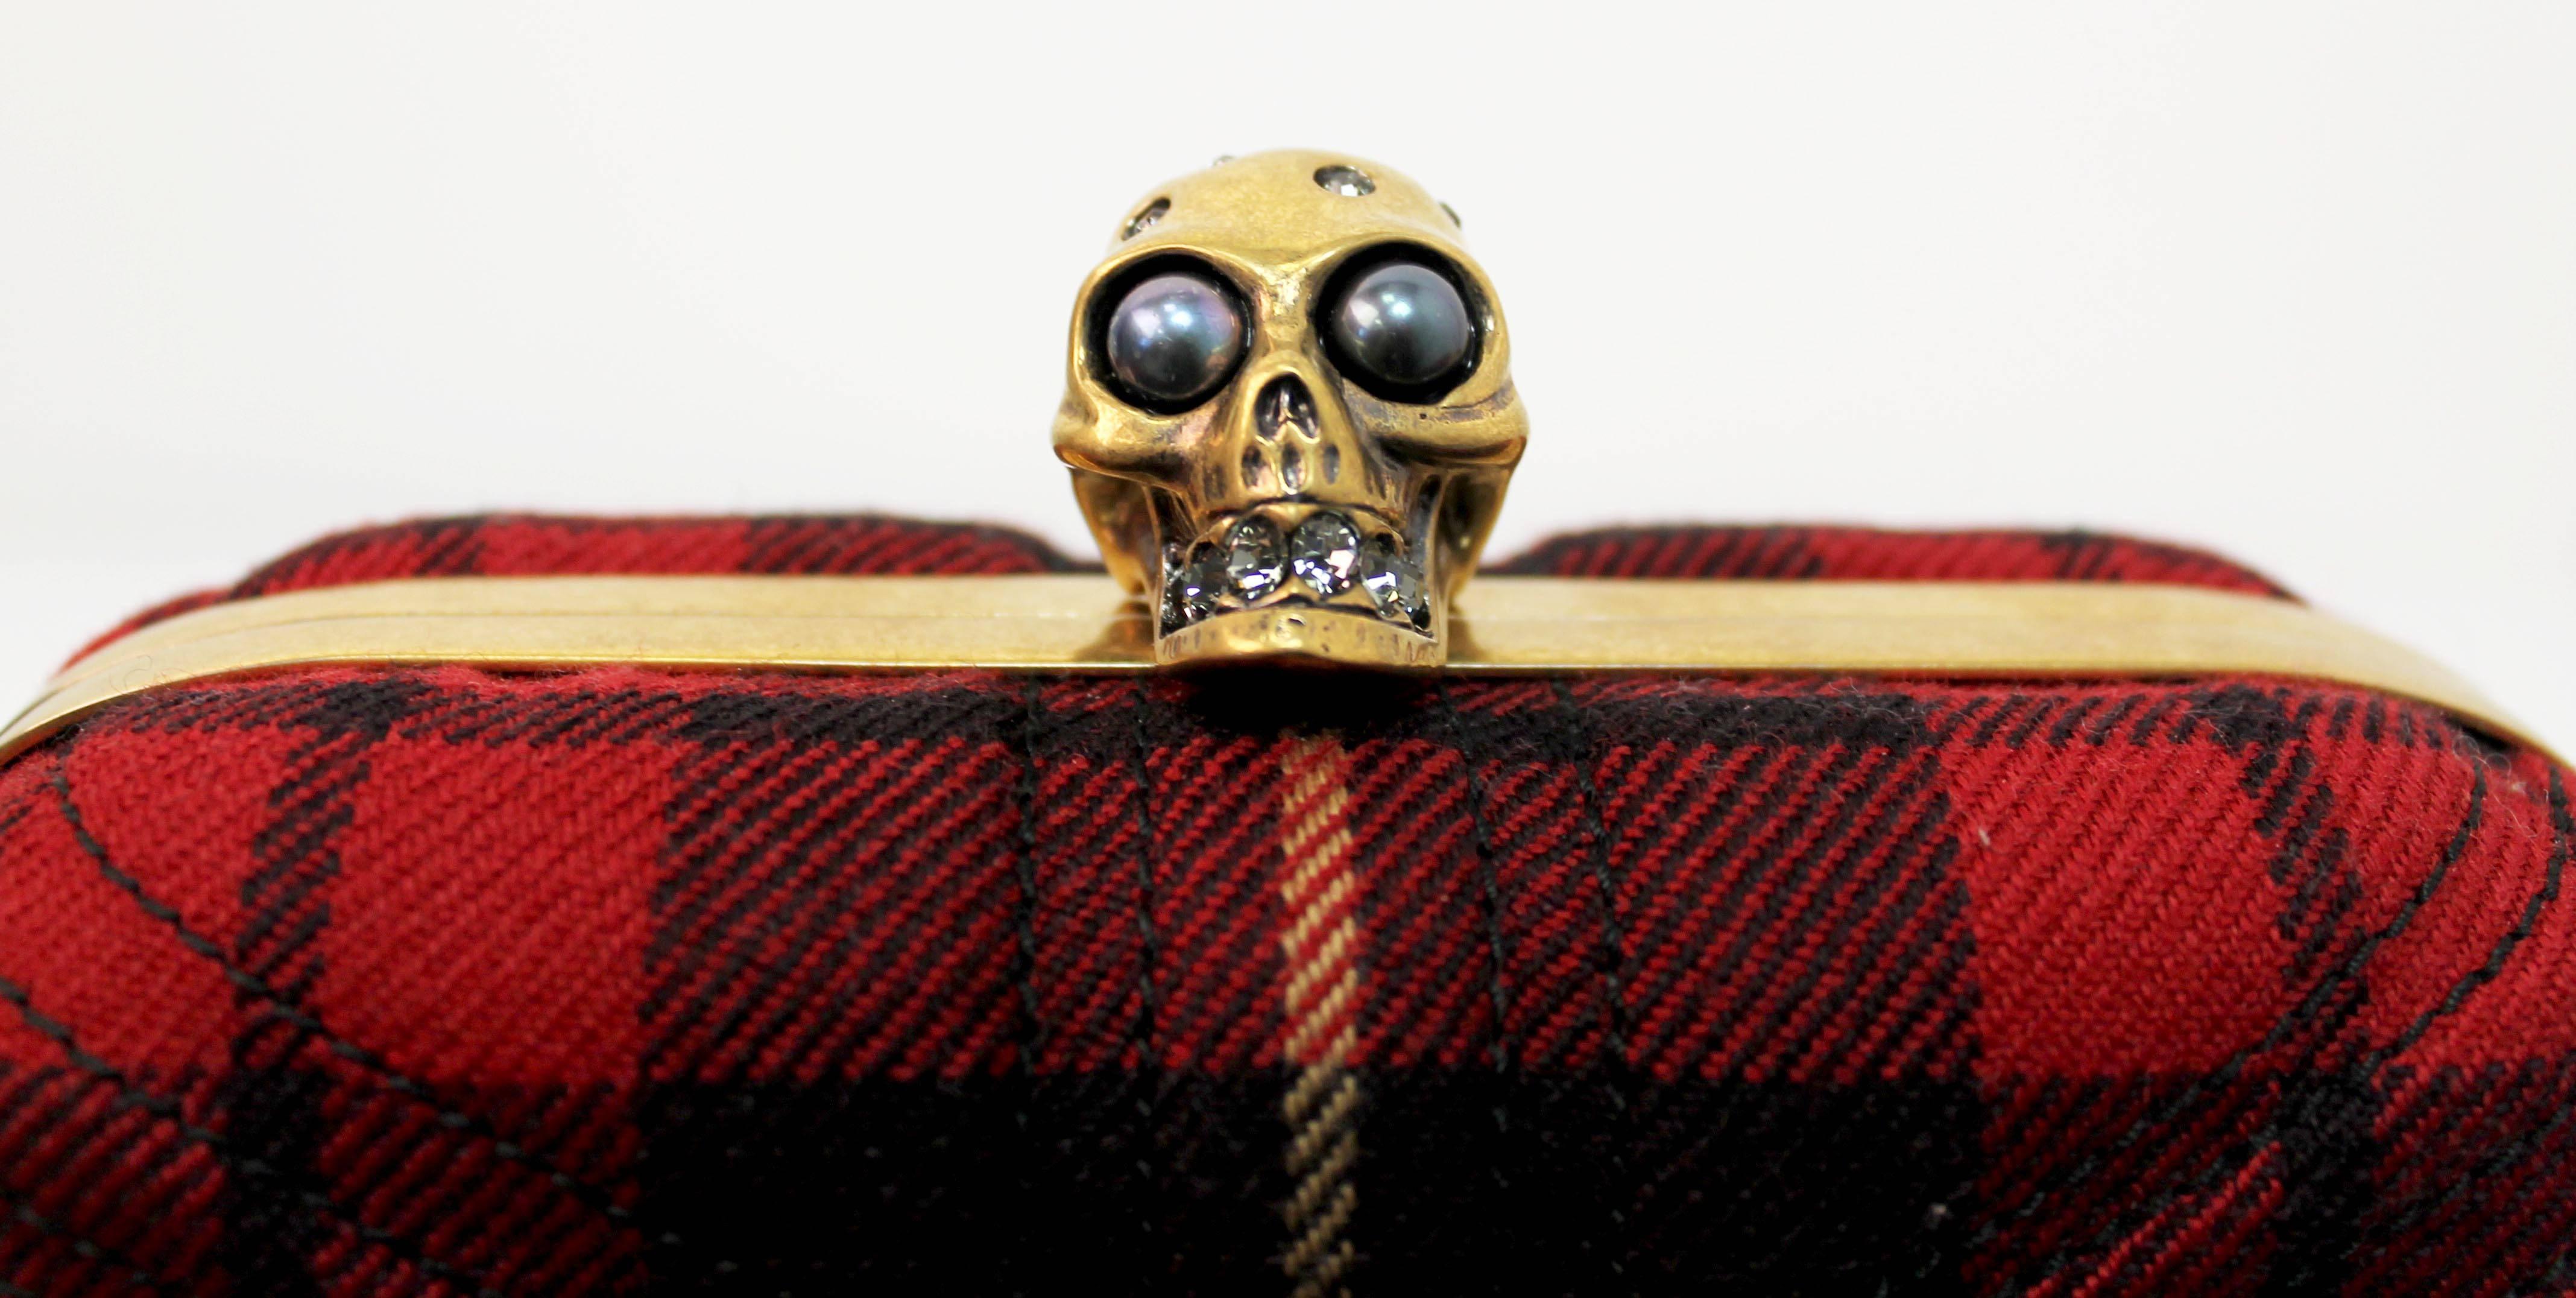 Iconic box clutch by Alexander McQueen. Features a top-stitched union jack on the exterior wool and a gold skull knob closure. Code is shown in image 6.